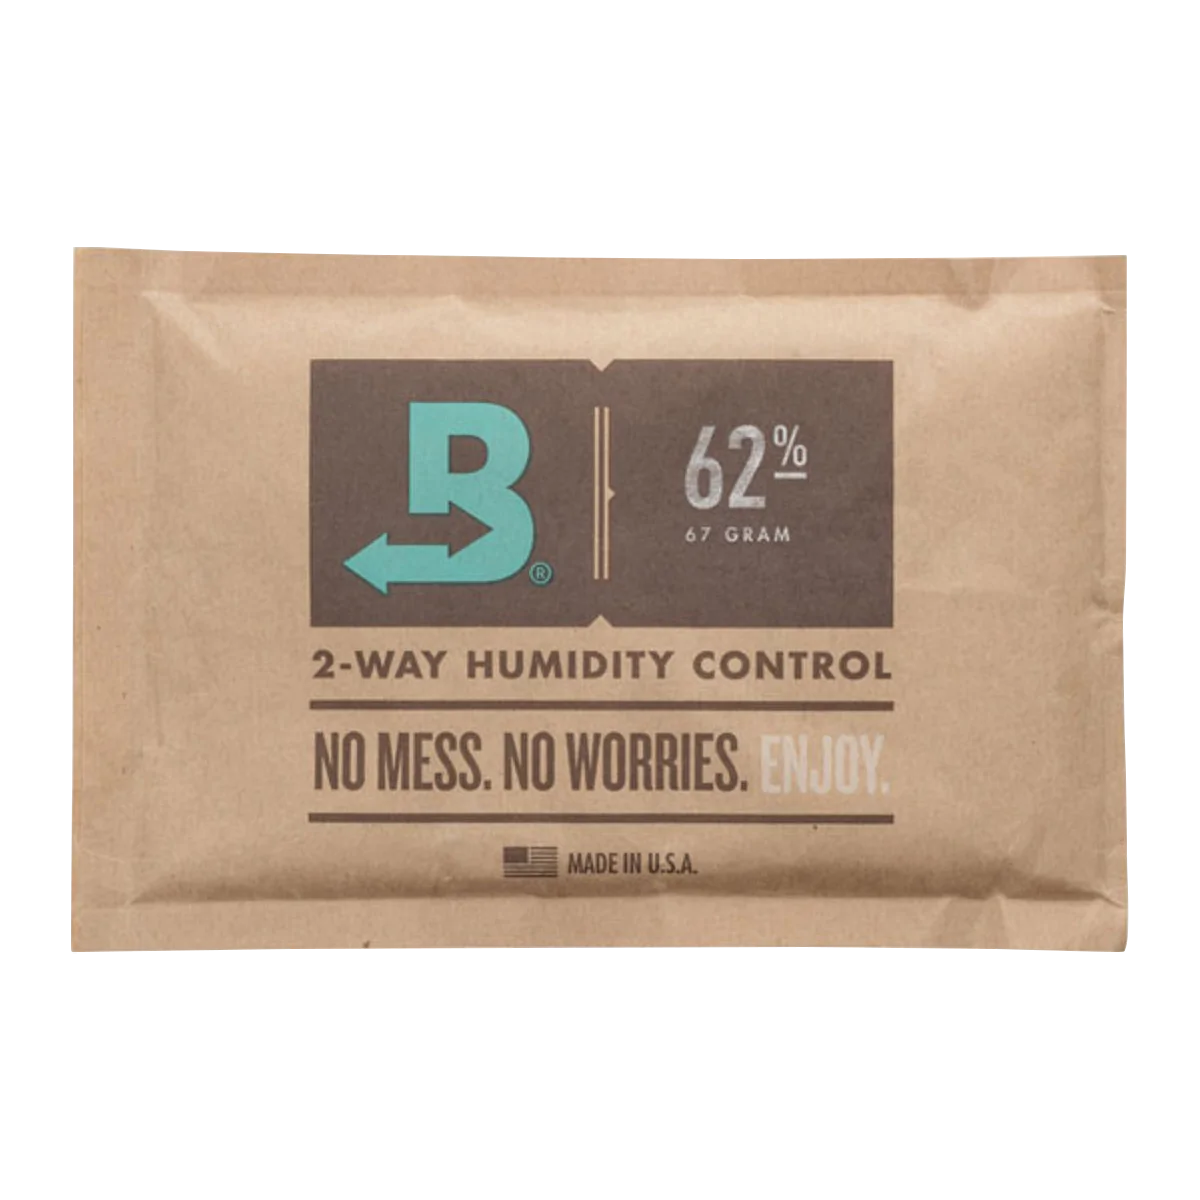 Boveda 62% Humidity Control Pack front view on seamless white background for preserving herbs